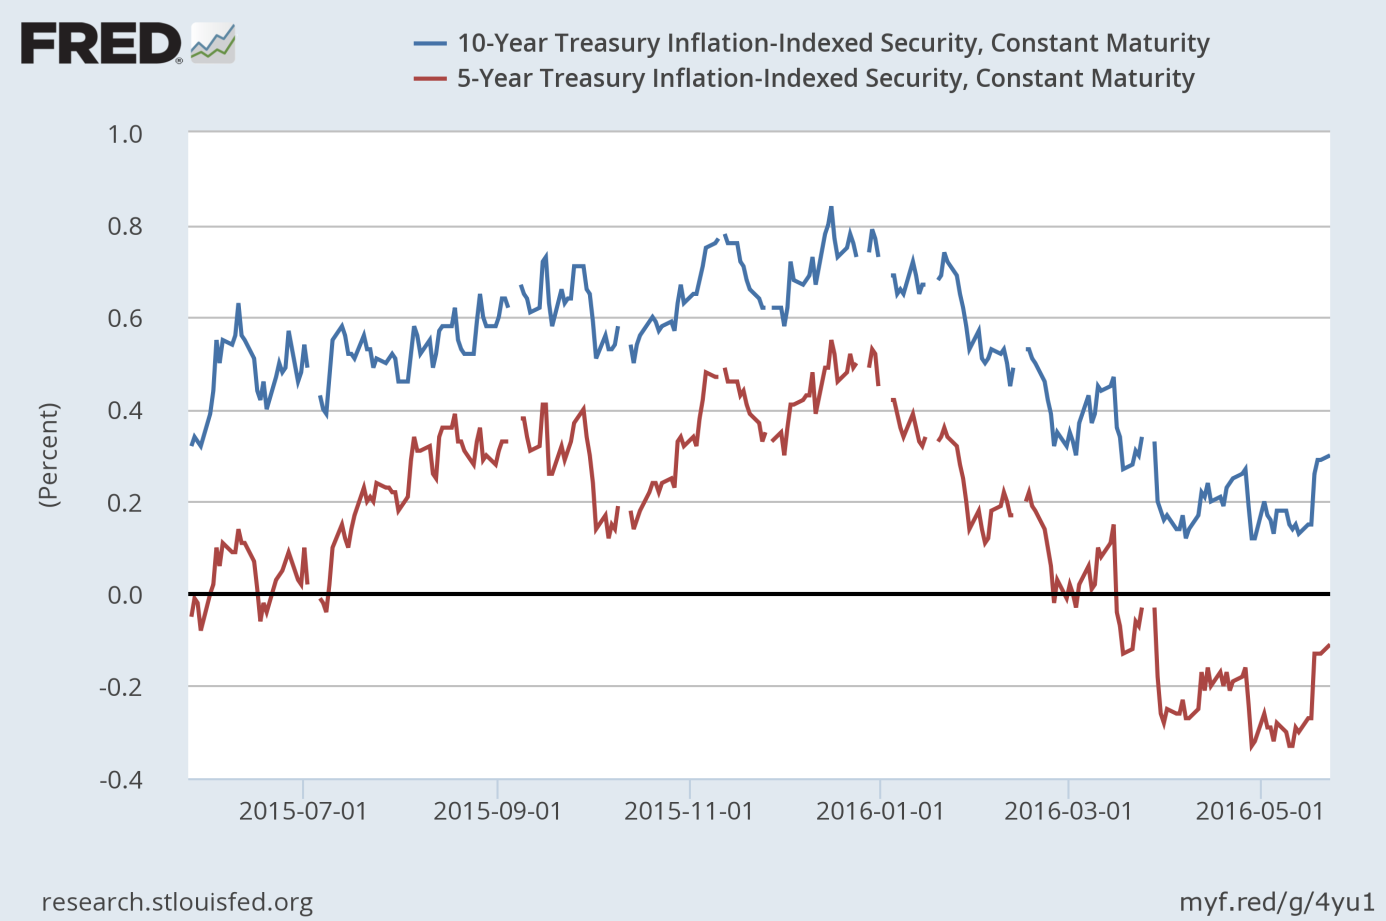 Inflation-Indexed Treasury rates